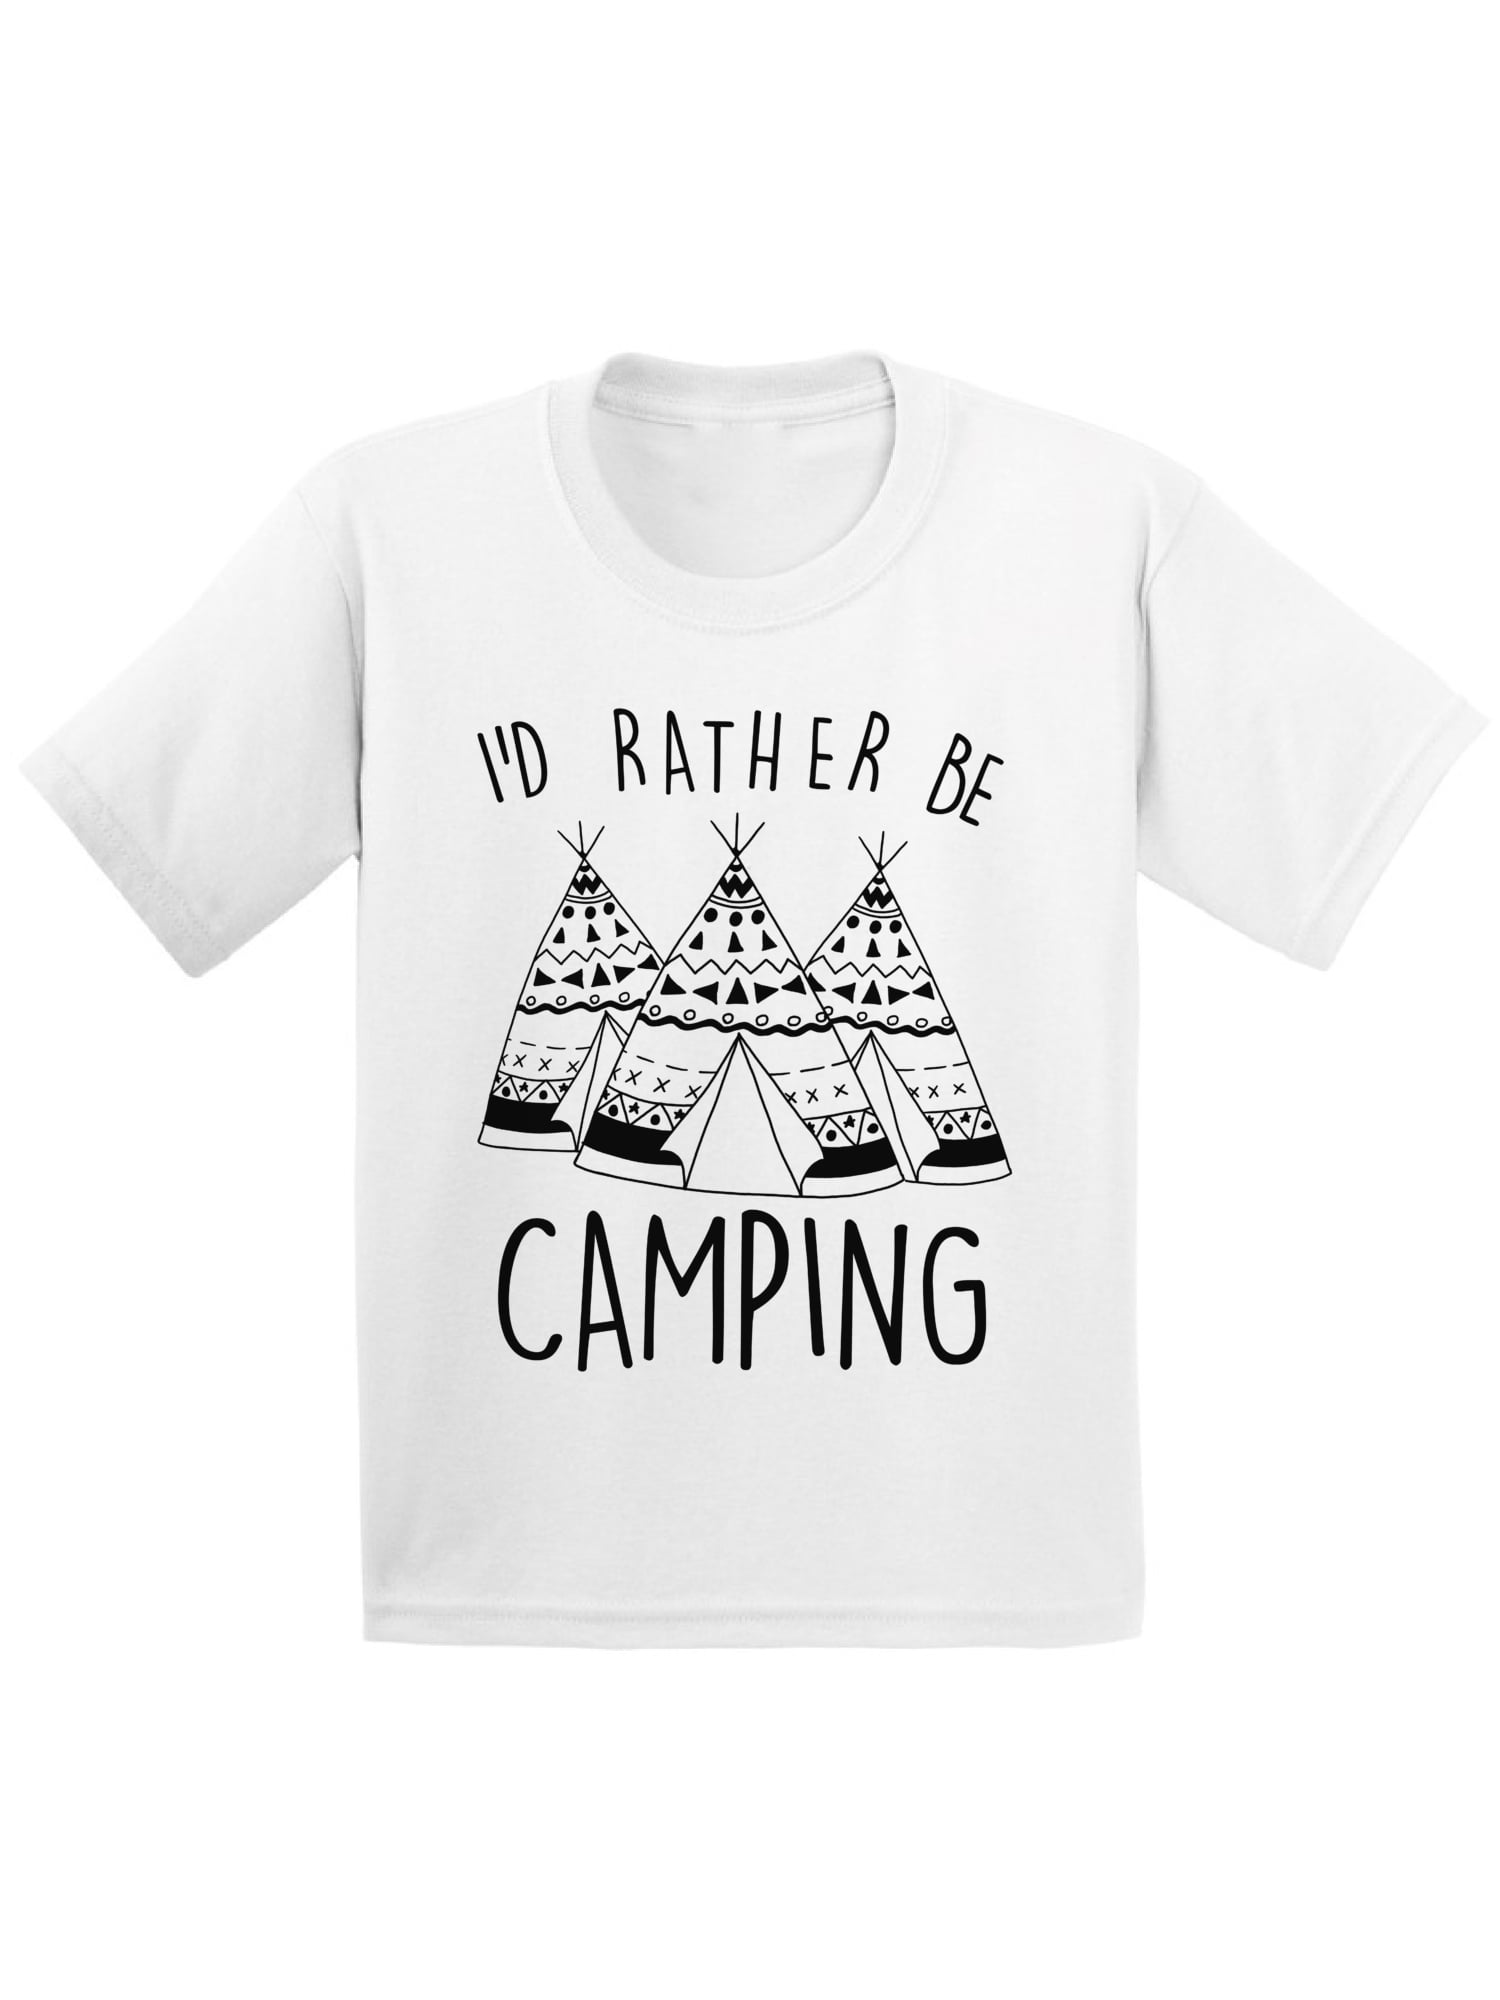 I'd Rather be Camping Kids Shirt I Love Camping. Camper T Shirt for Boys Camping Shirt for Girls Camping Lovers Gifts